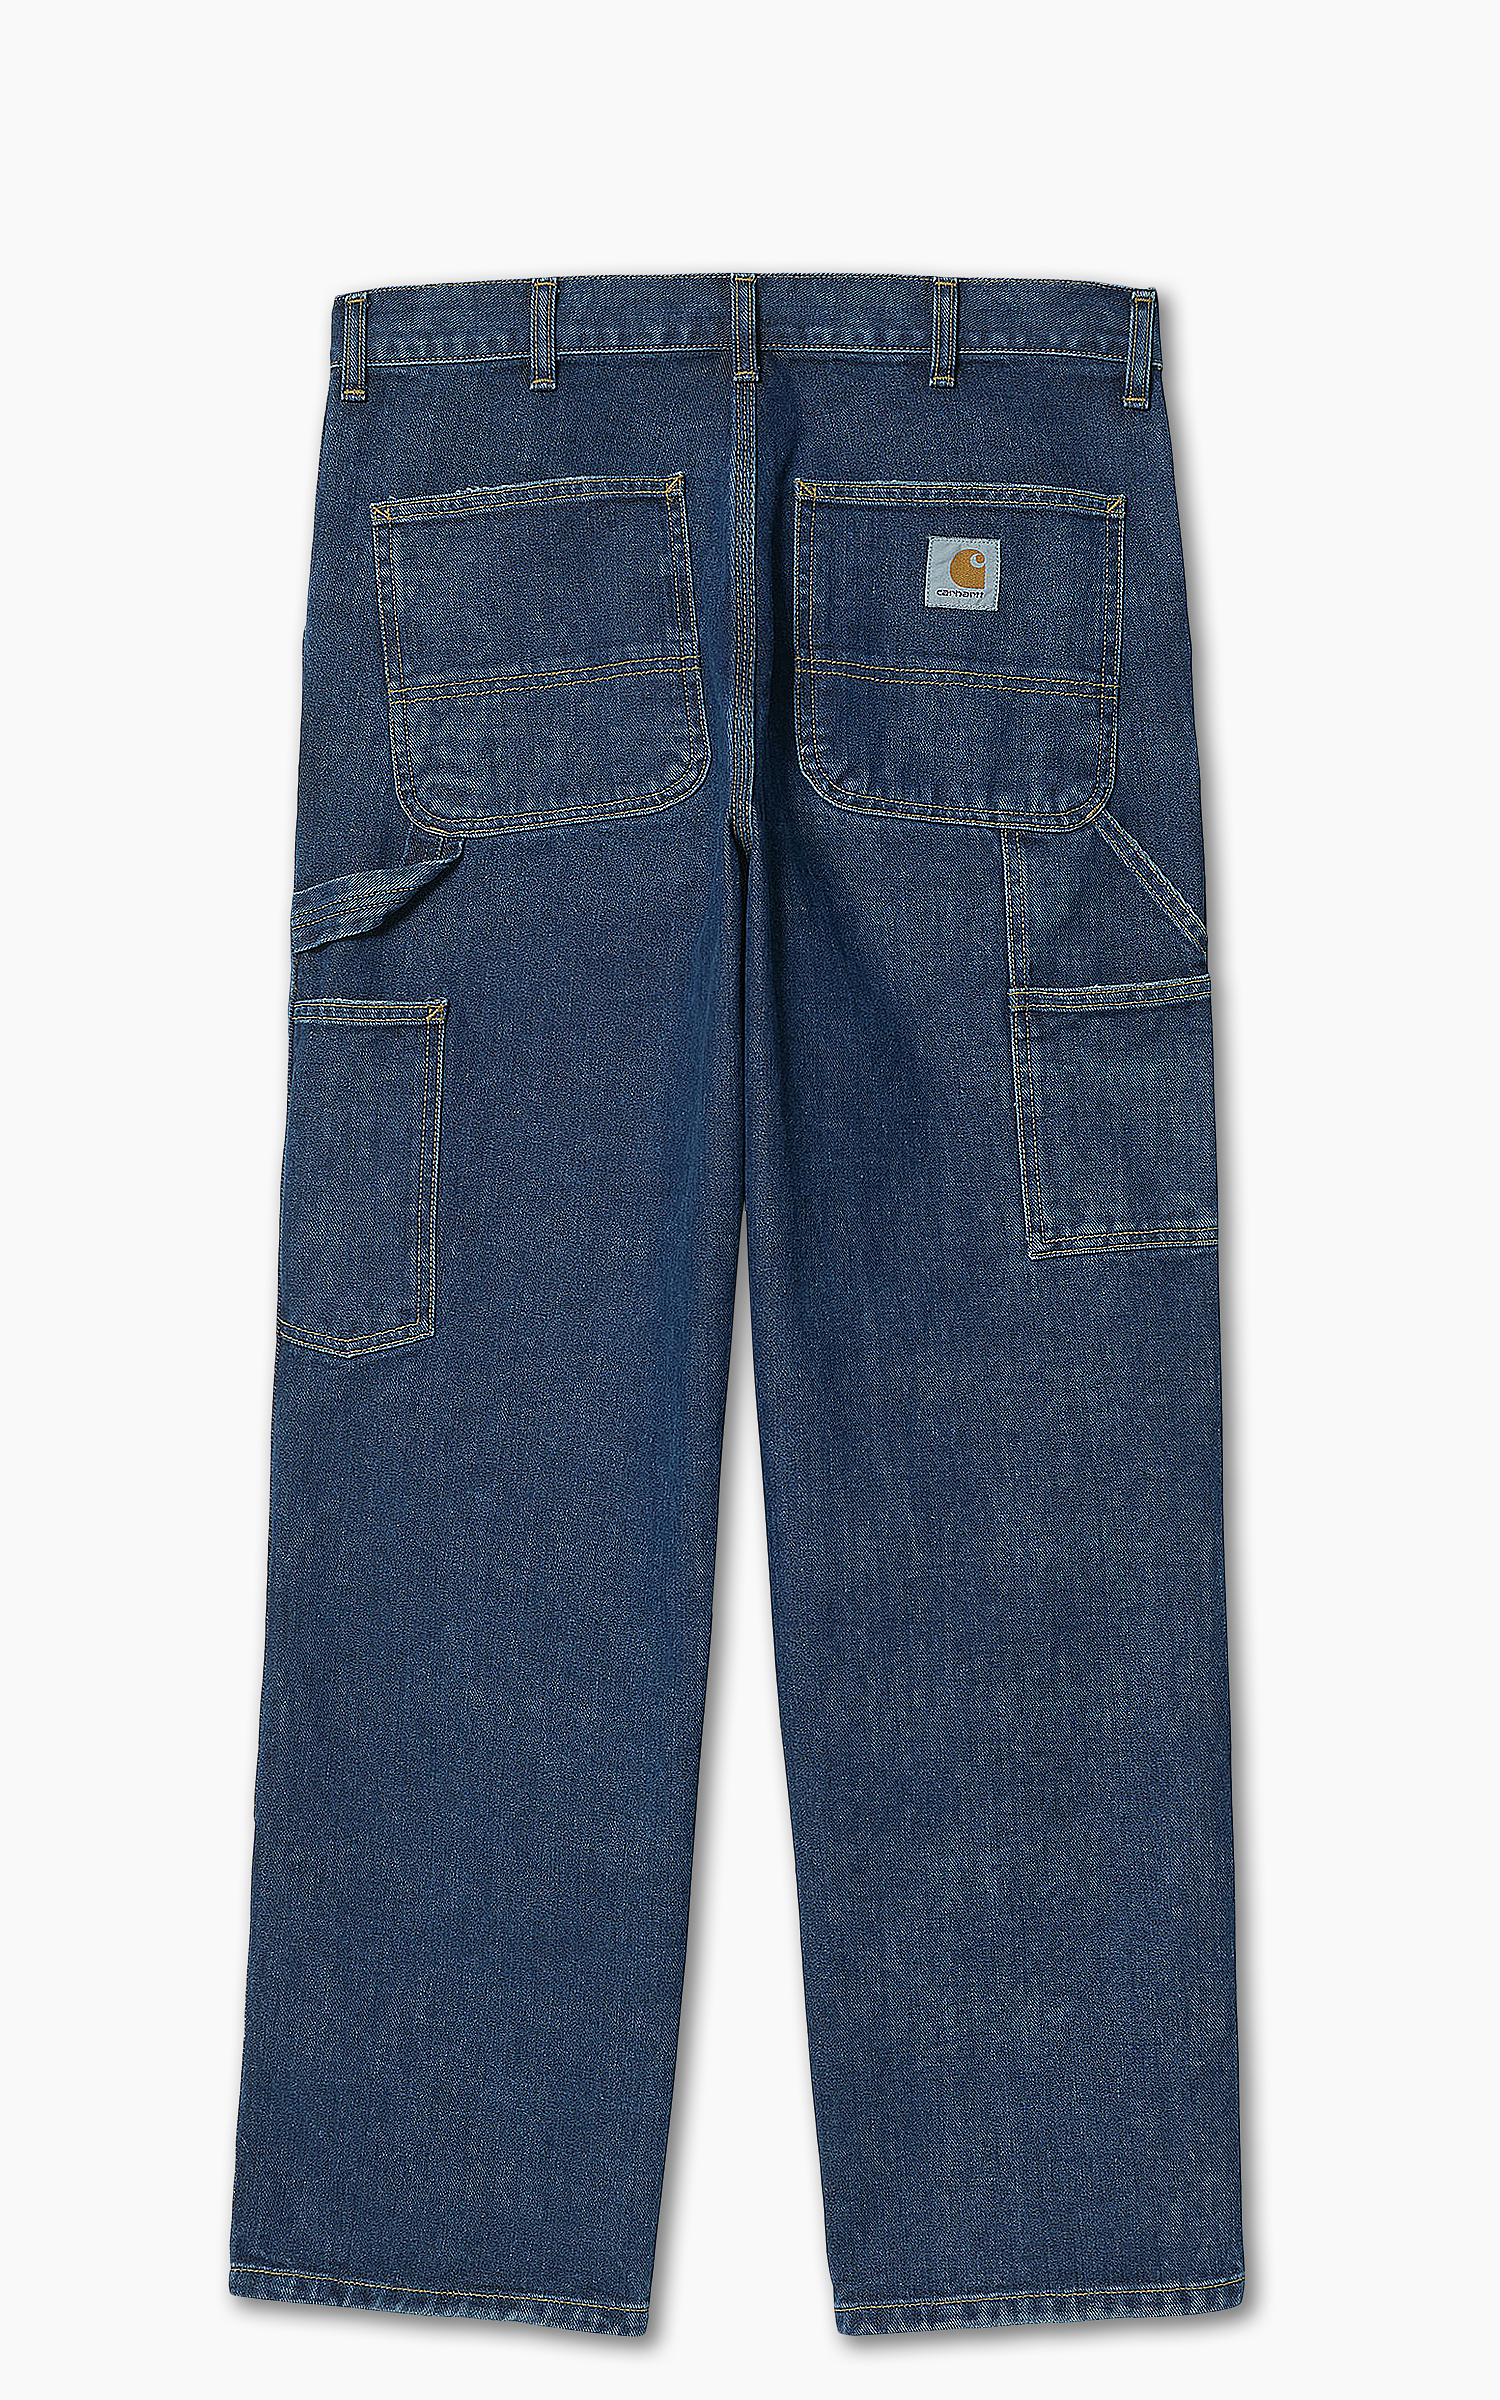 Carhartt WIP Double Knee Pant Smith Denim Stone Washed Blue | Cultizm